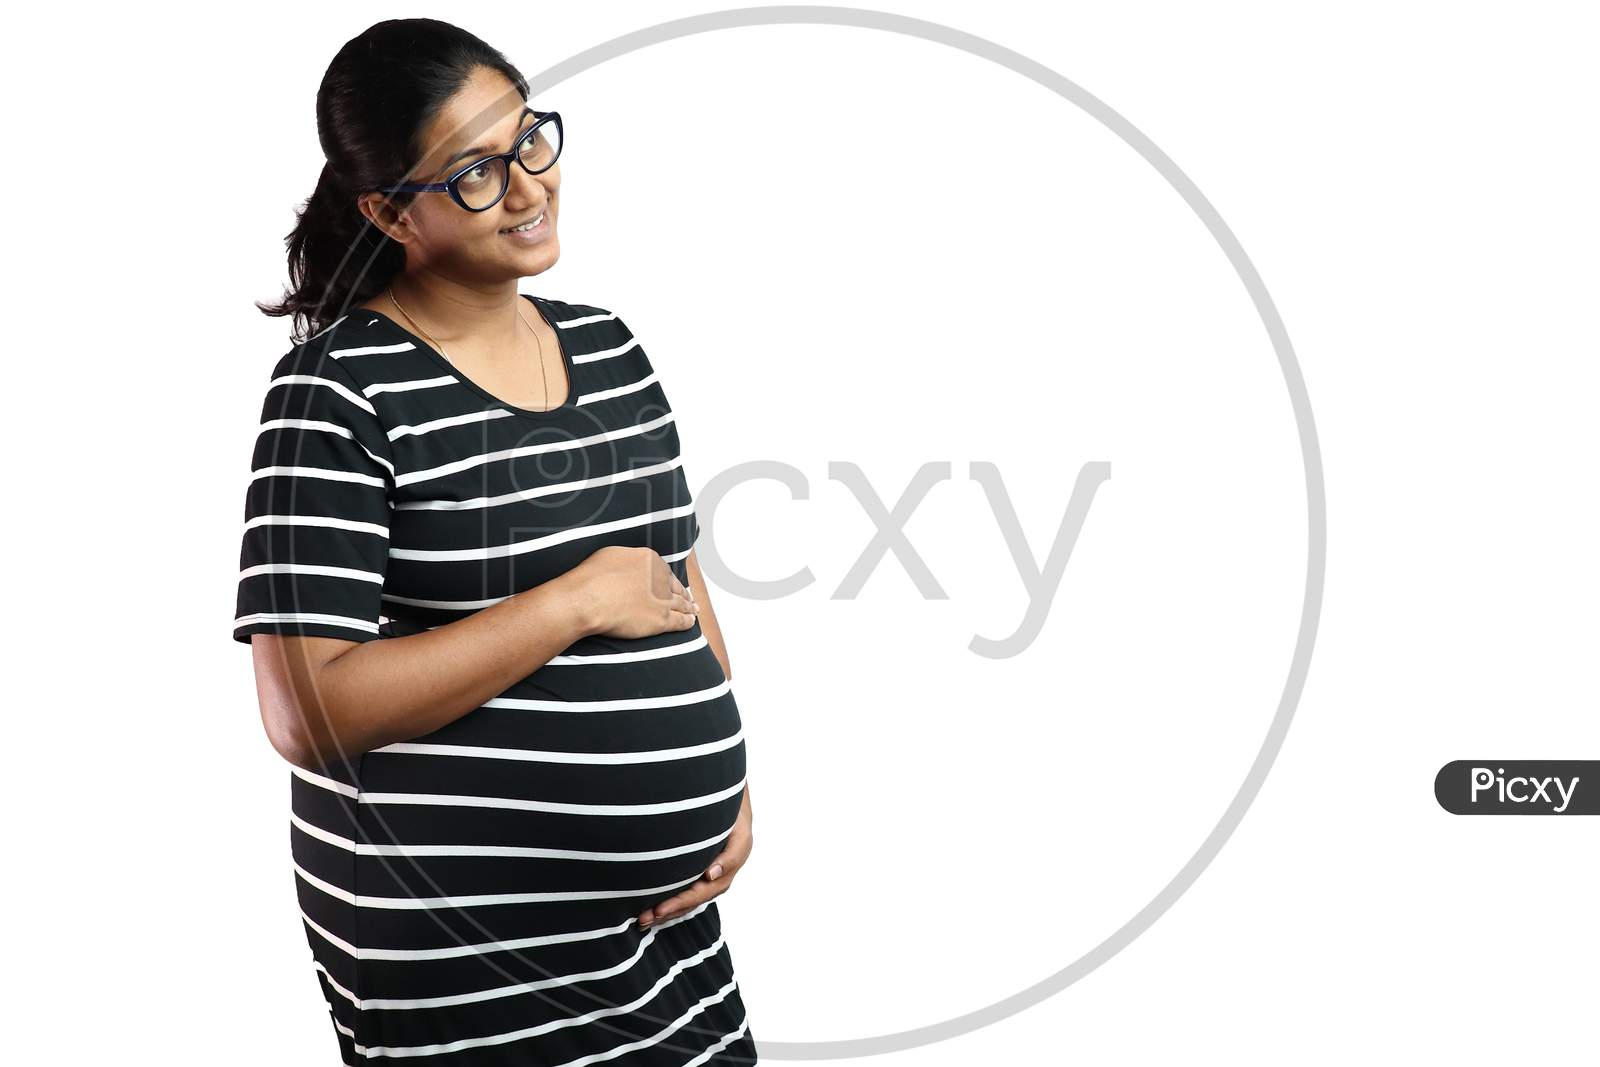 A Pregnant Lady Wearing Spectacles With Black Dress With White Stripes And Hands On Belly Looking Up In Delight With Copy Space For Text.